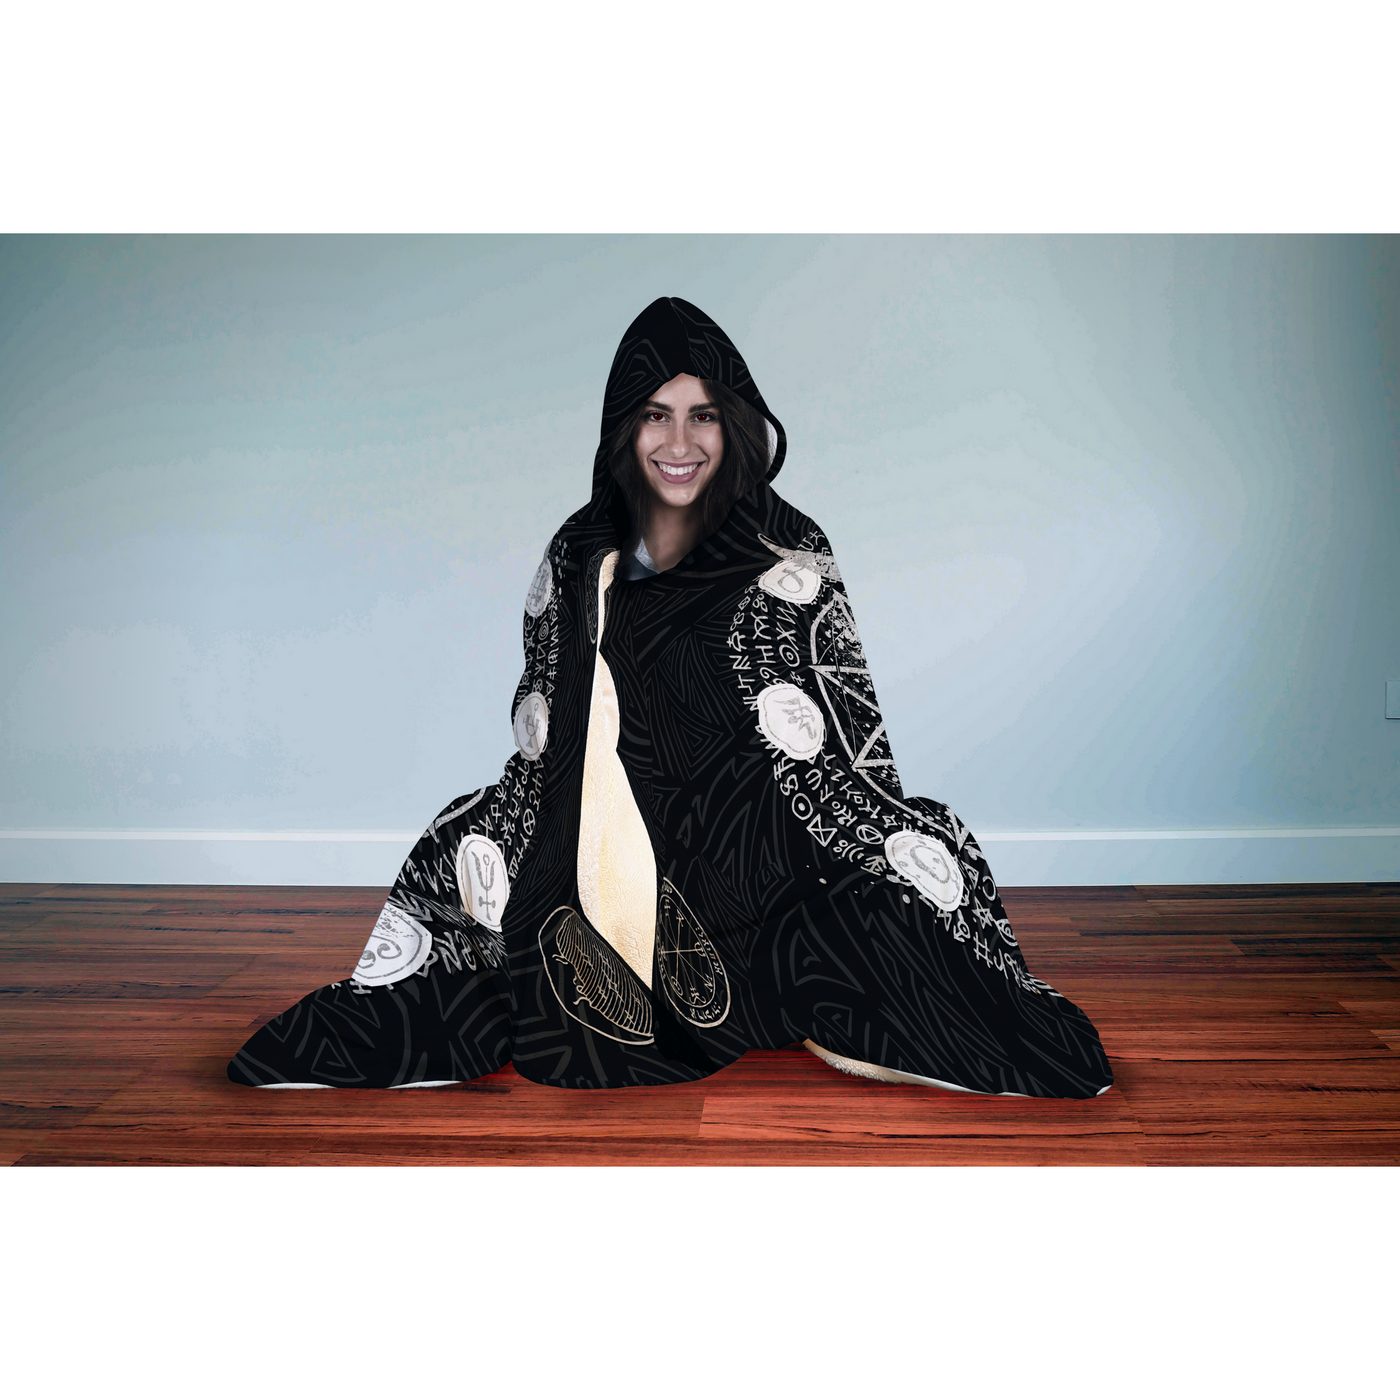 Gray Rams Head With Esoteric Runes Gothic | Hooded Blanket